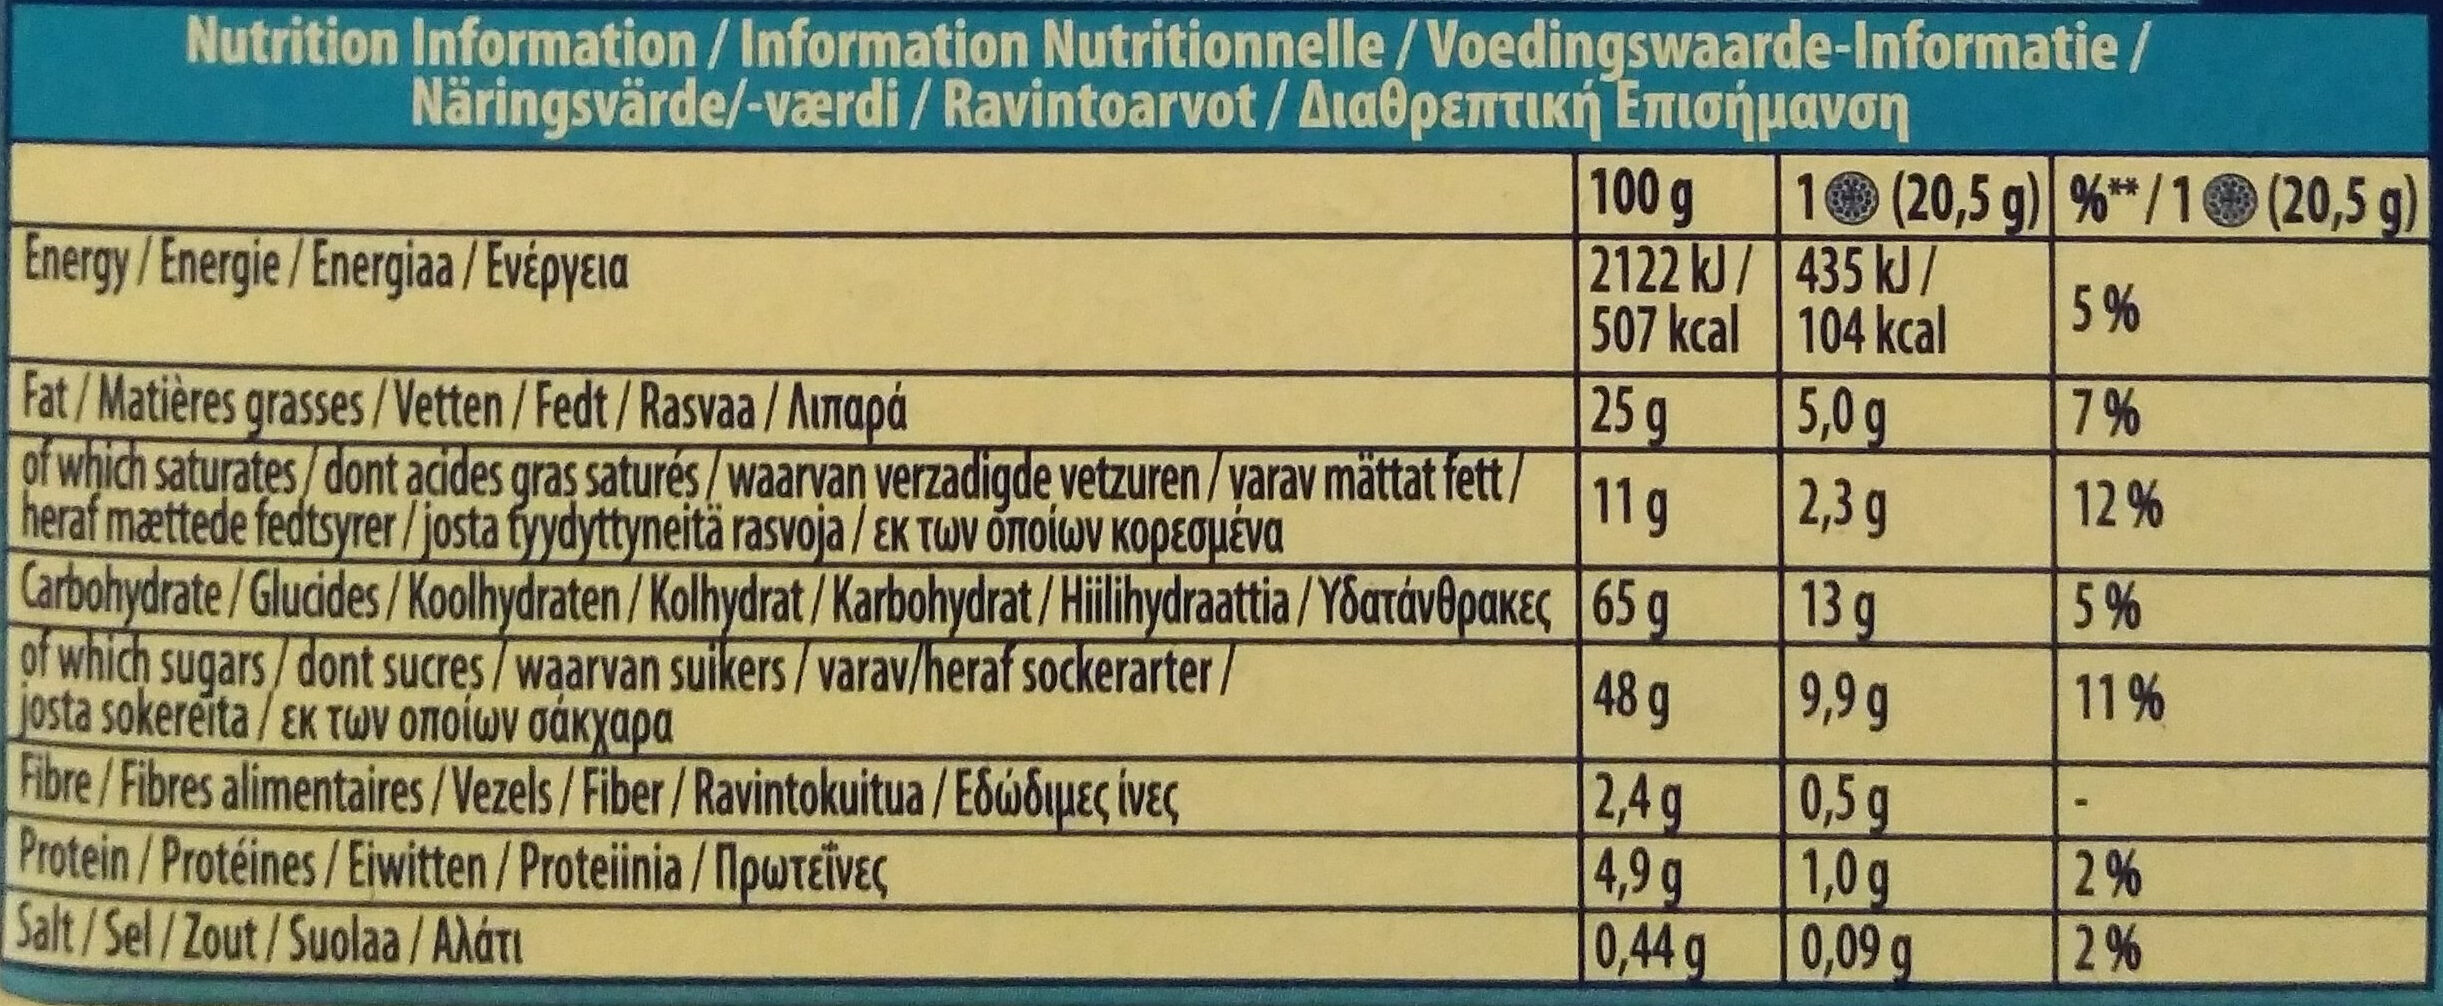 Milk Chocolate Covered Biscuits 6 Pack - Nutrition facts - en